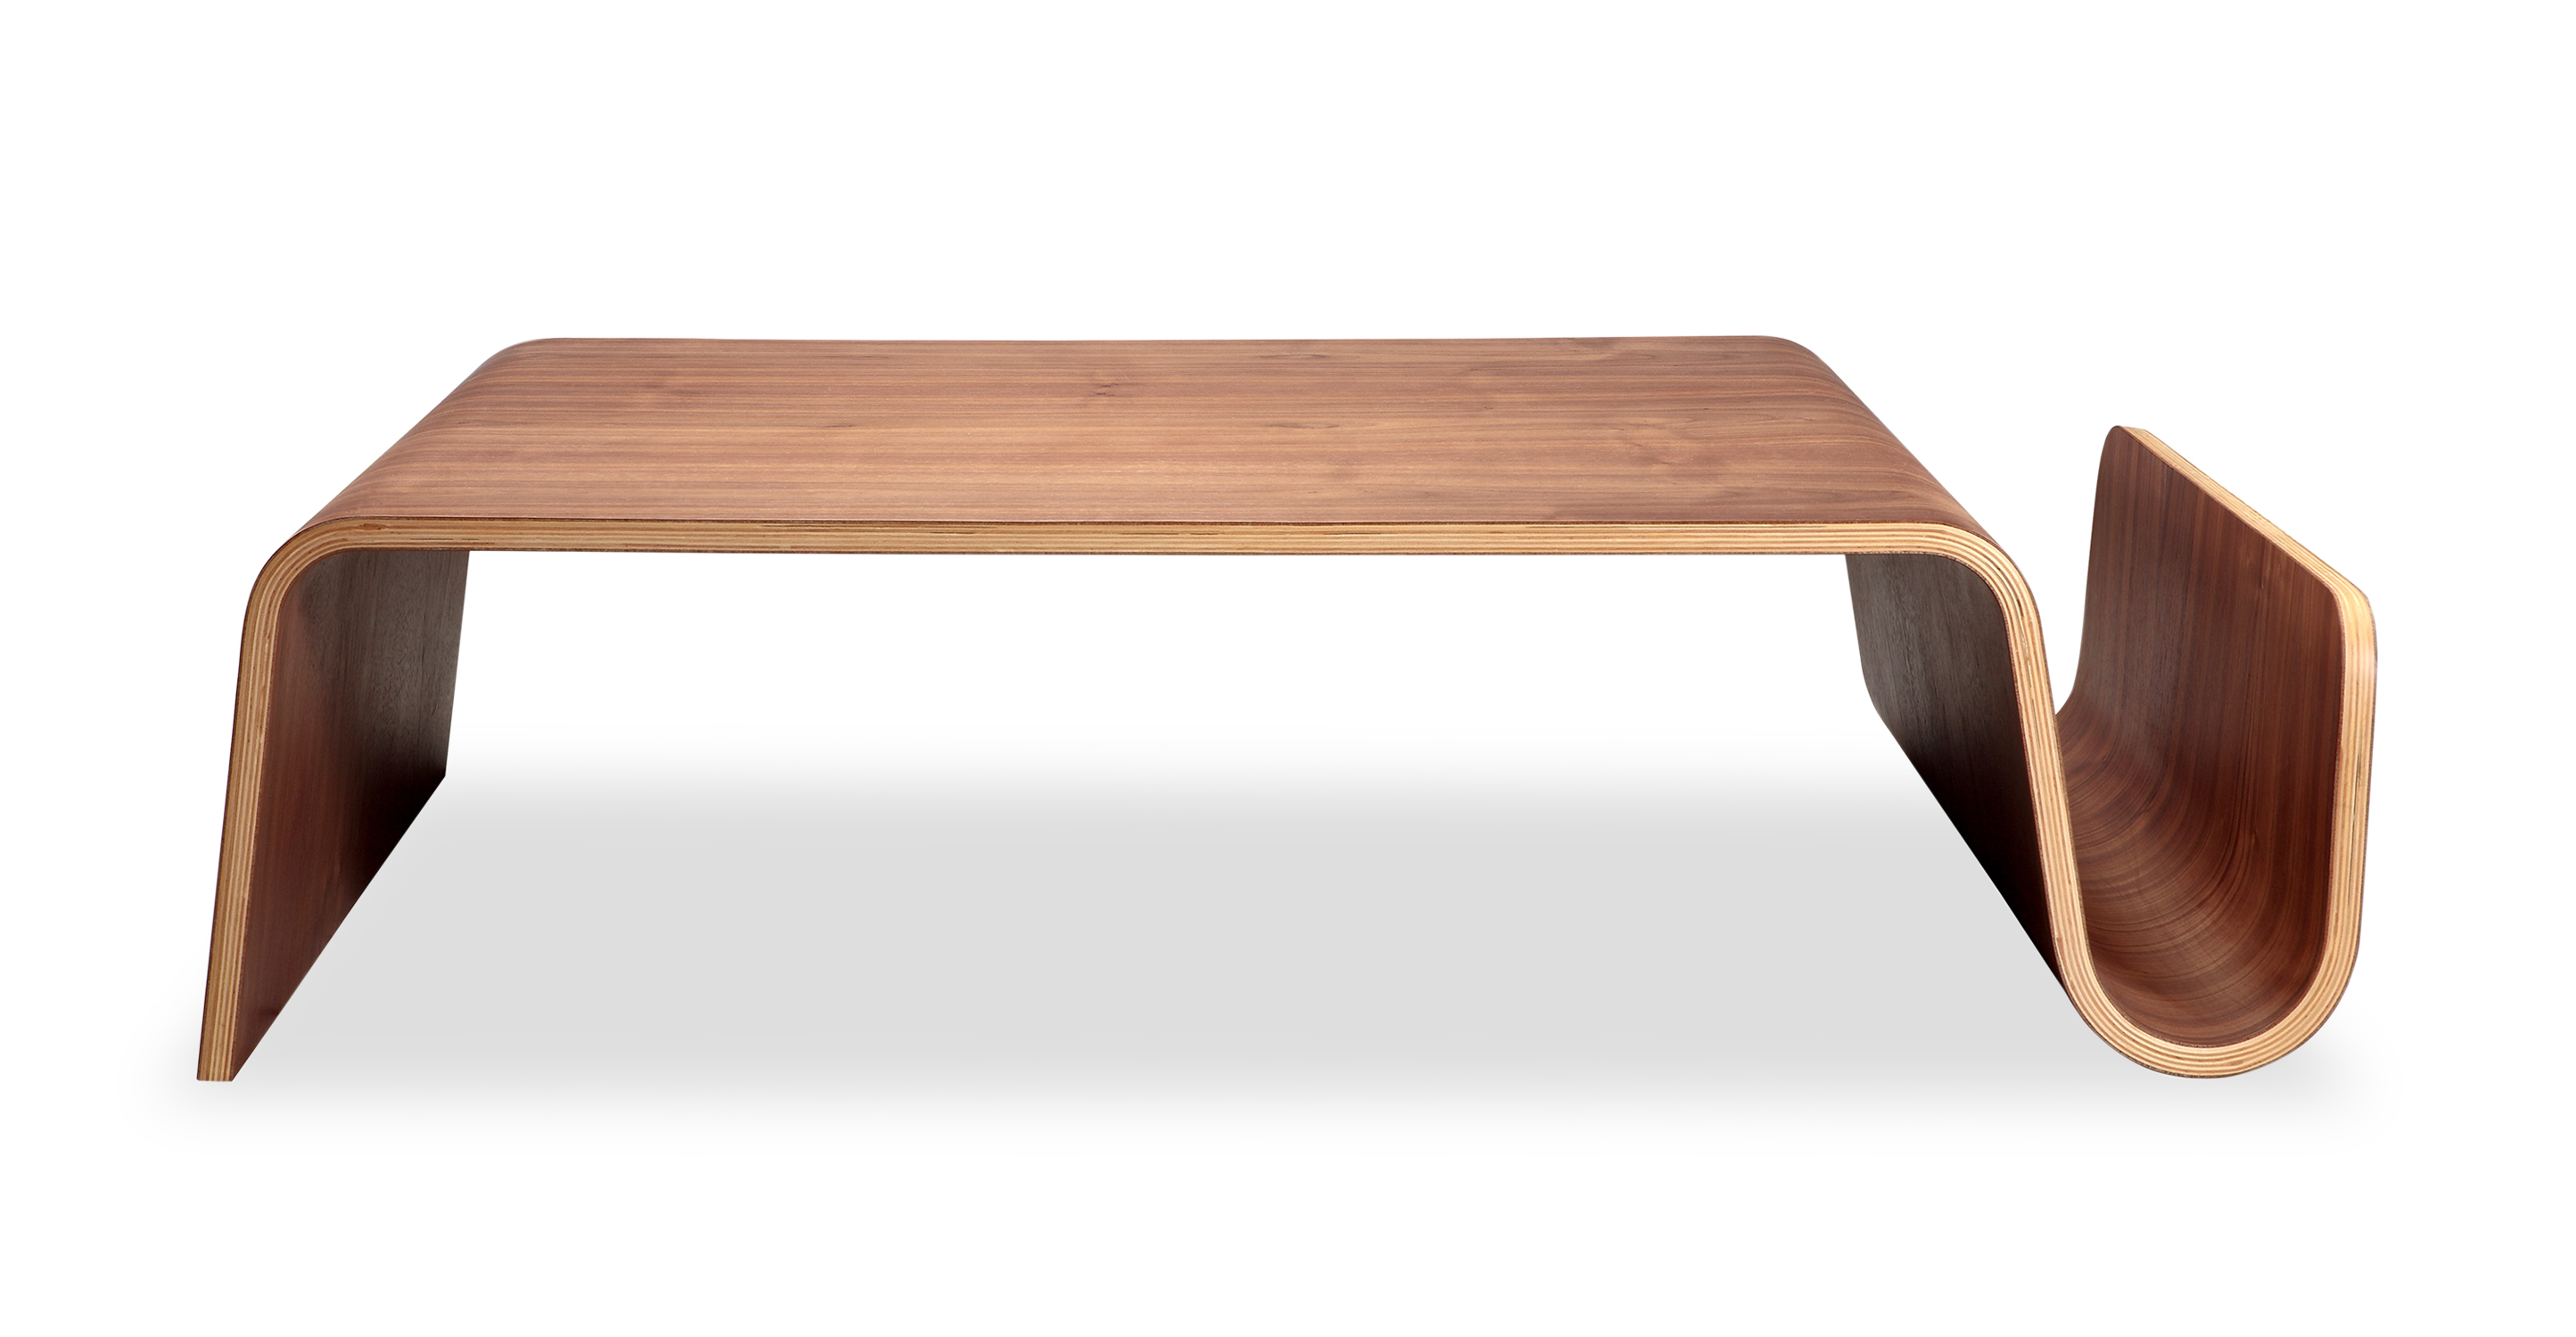 Scando Table Large Bent Wood Coffee Table Simple Modern Creative